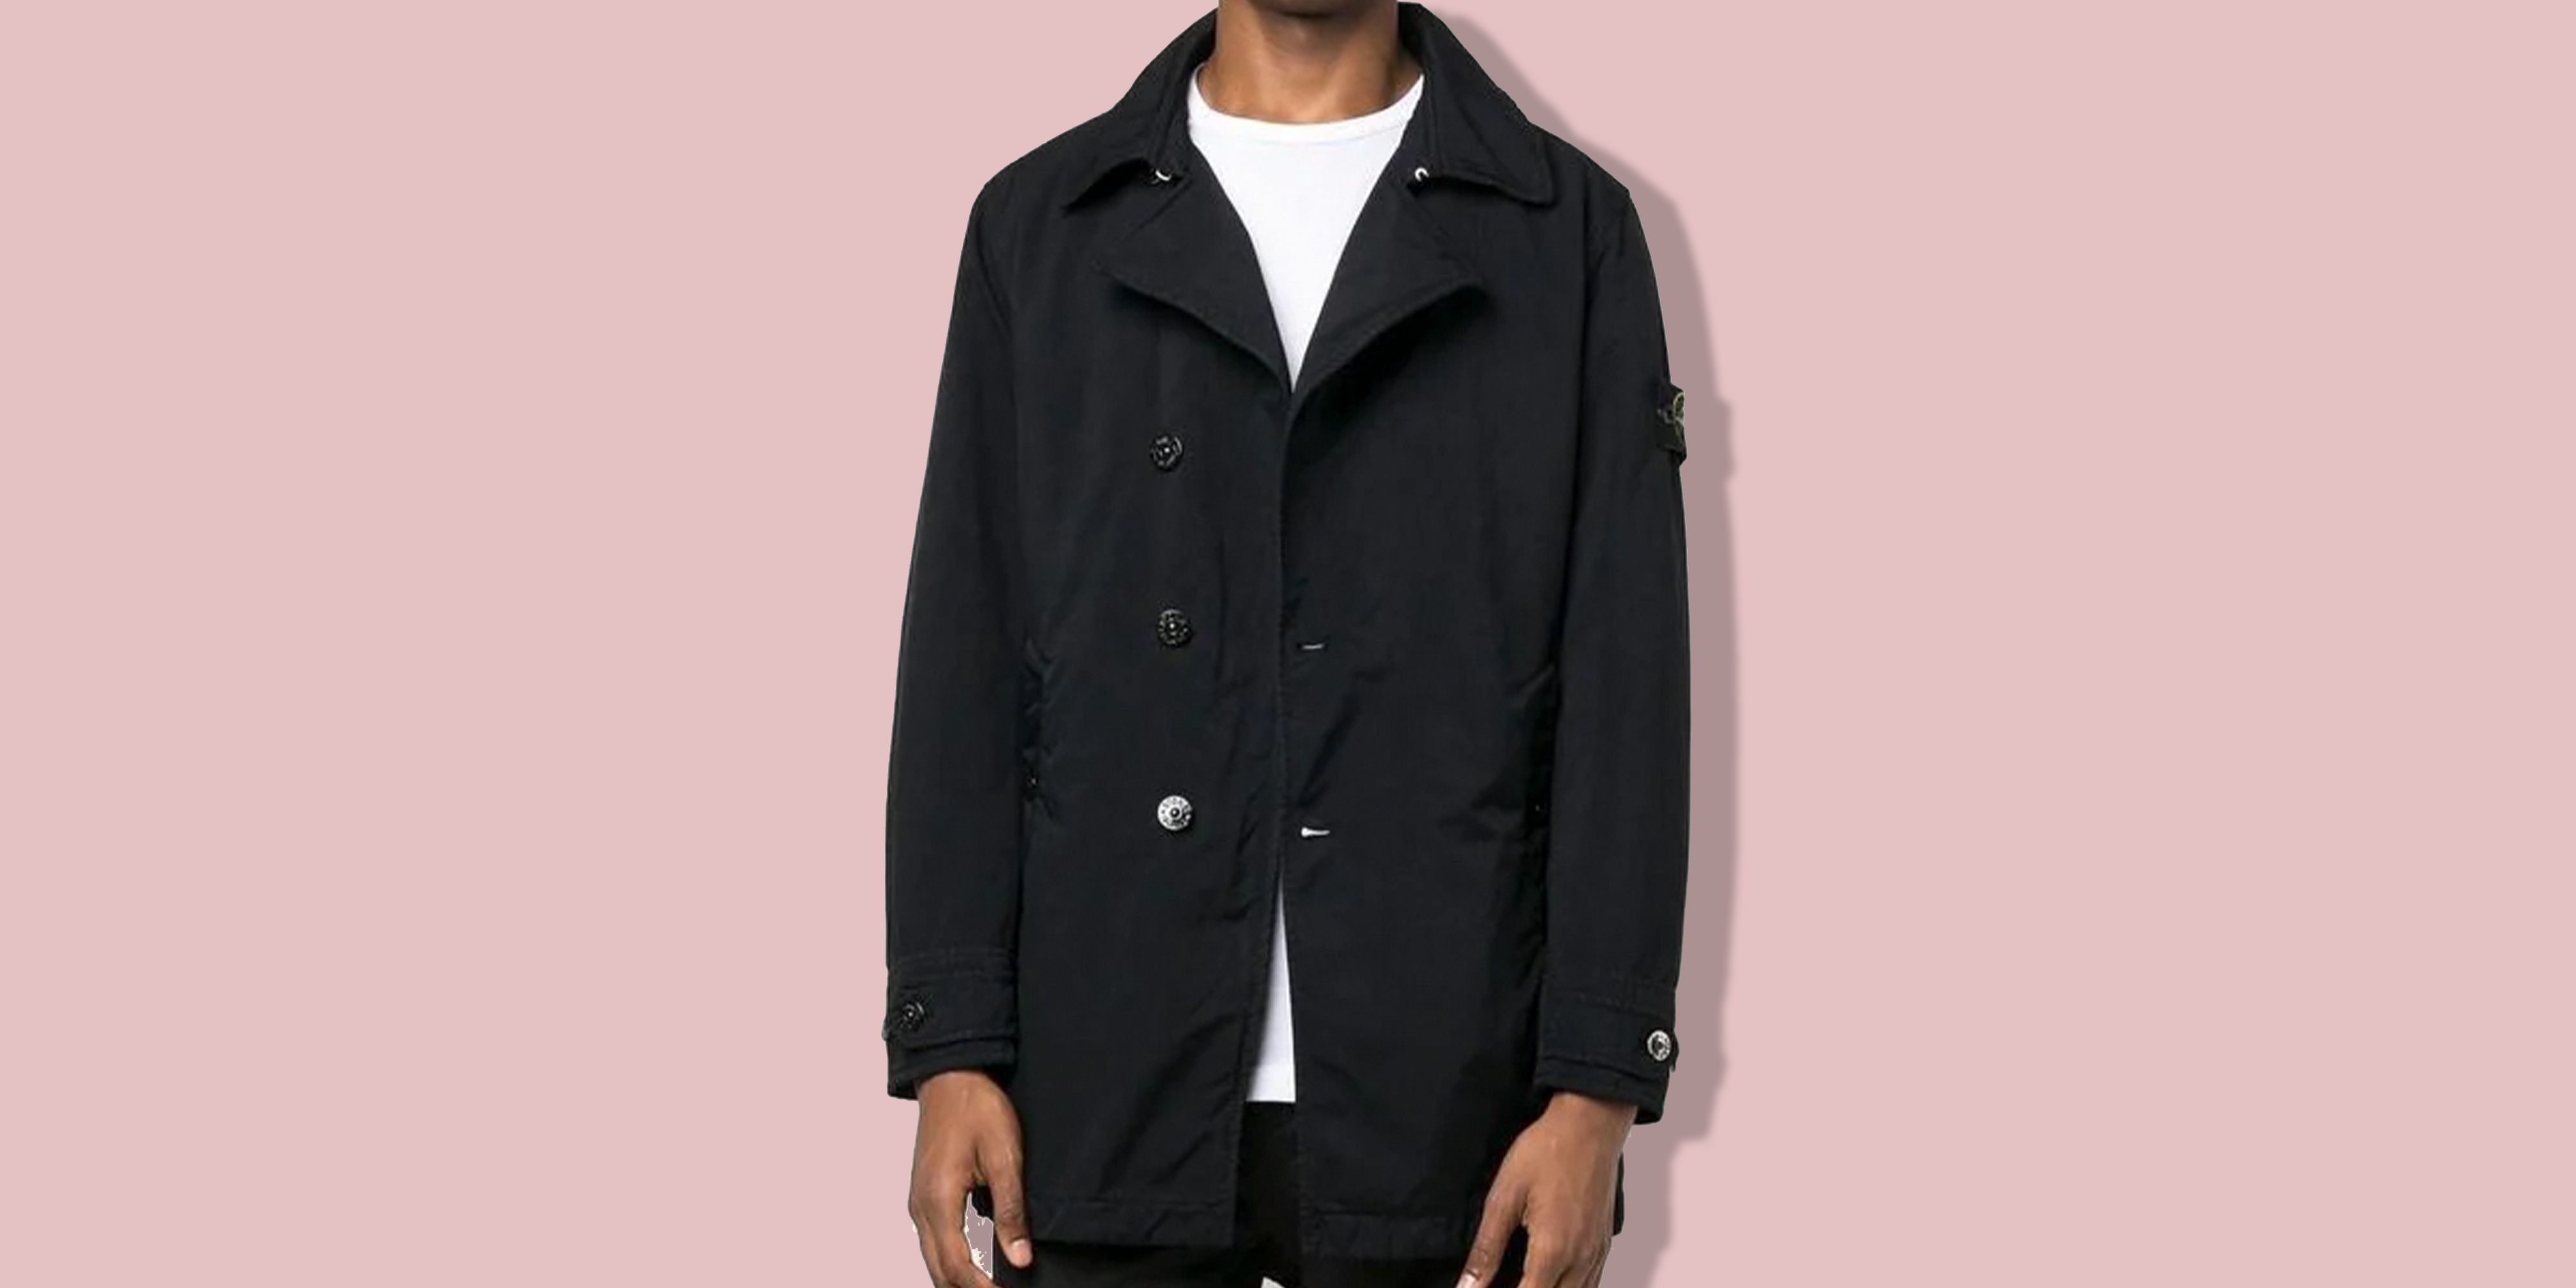 20 Best Peacoats for 2023 - Peacoat Guide